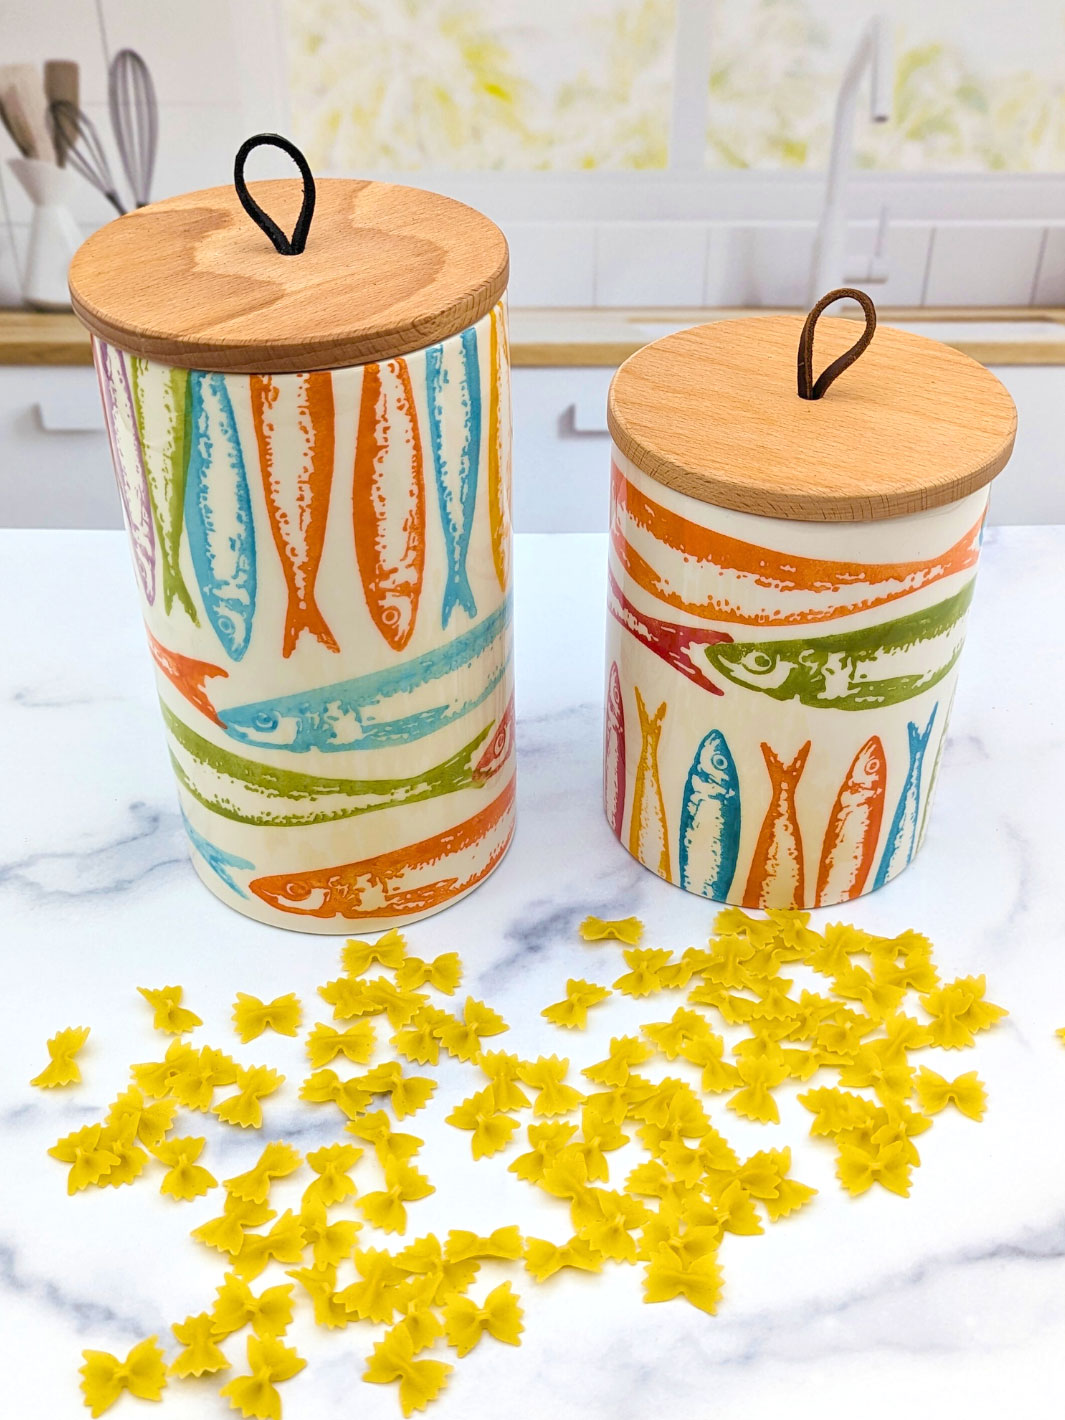 Set of 2 Portuguese Pottery Ceramic Kitchen Canisters - POP Sardines